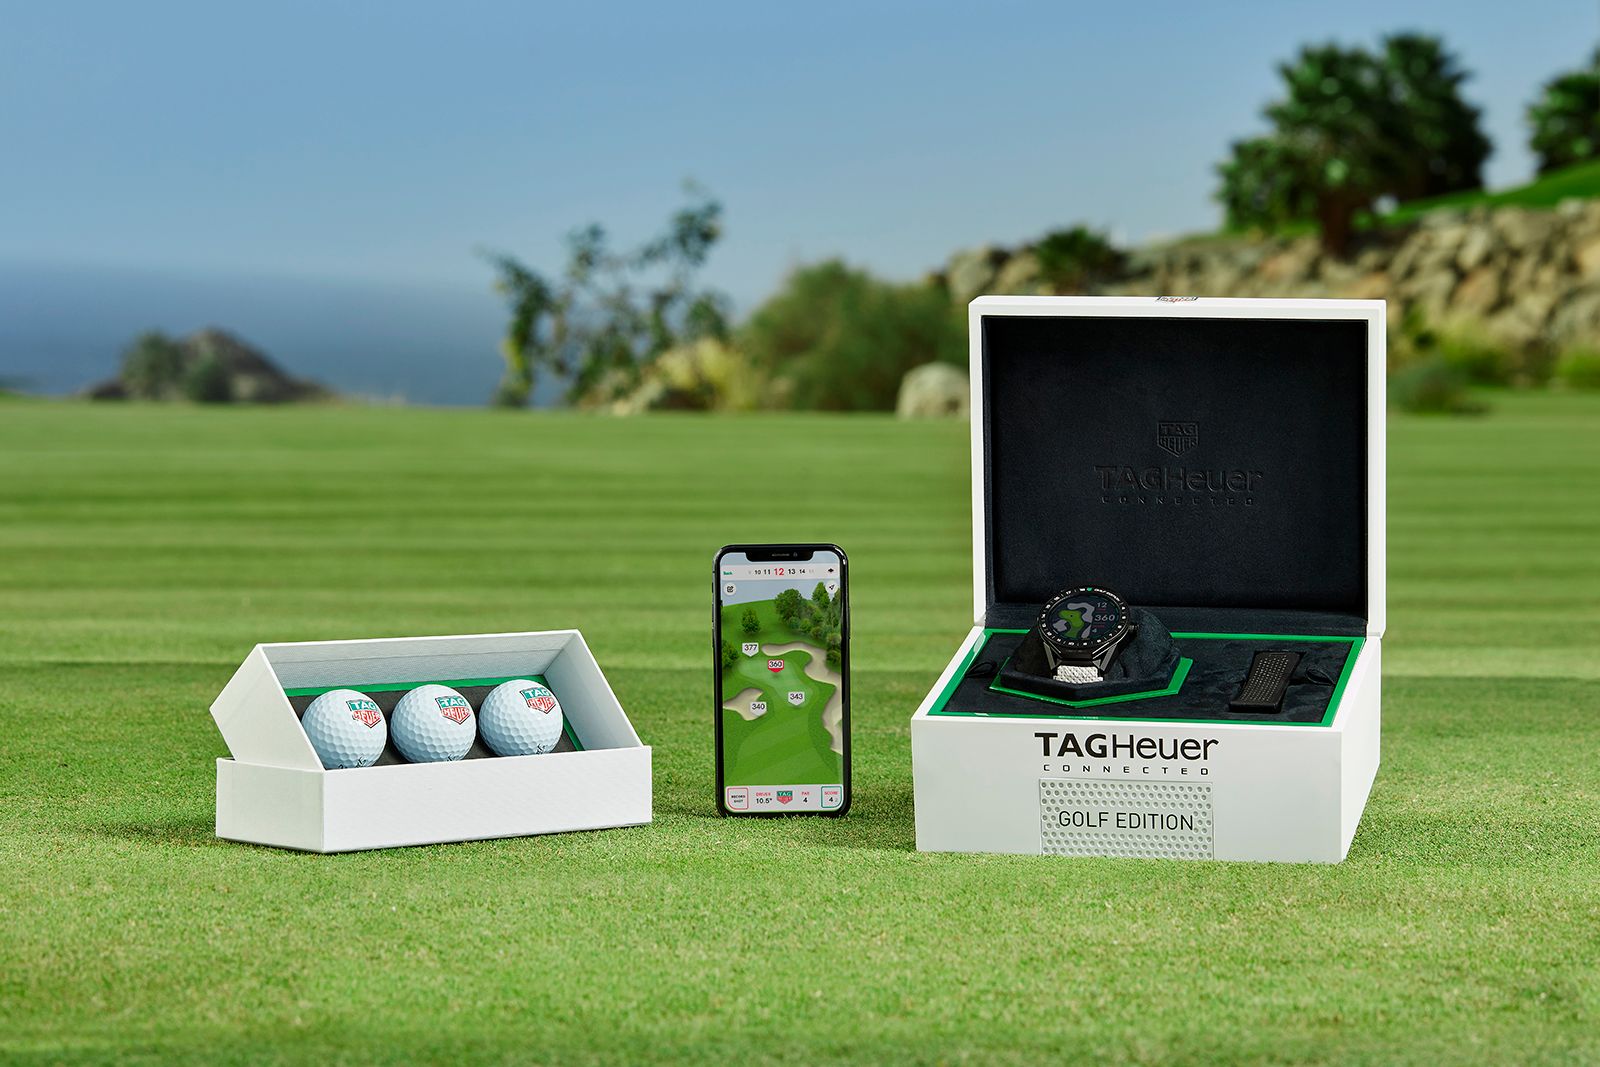 Tag Heuer Golf Edition Smartwatch And App Aim To Improve Your Game image 3